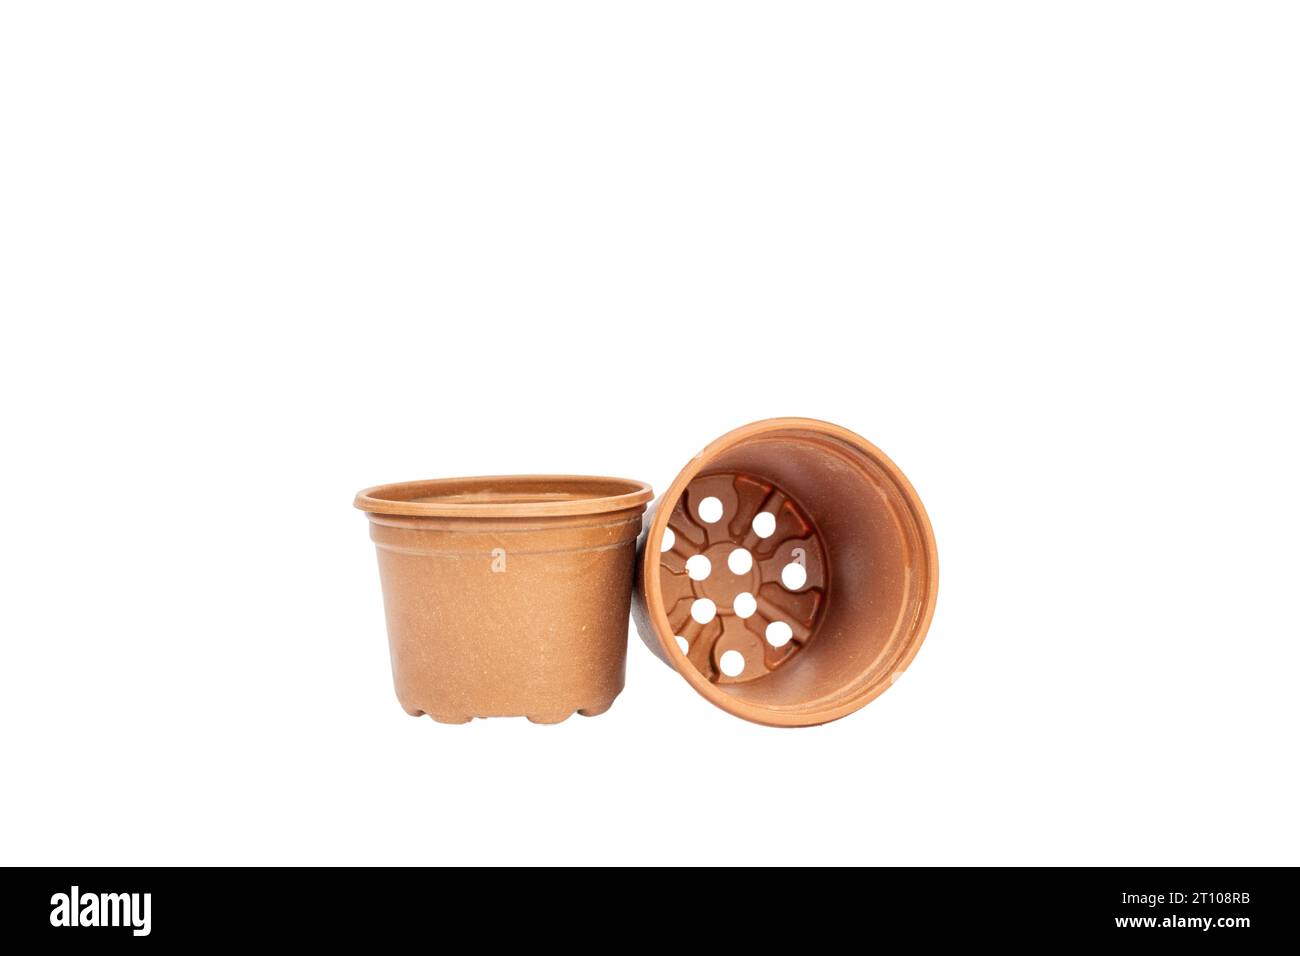 Flexible plastic pots for plants with drainage holes Stock Photo